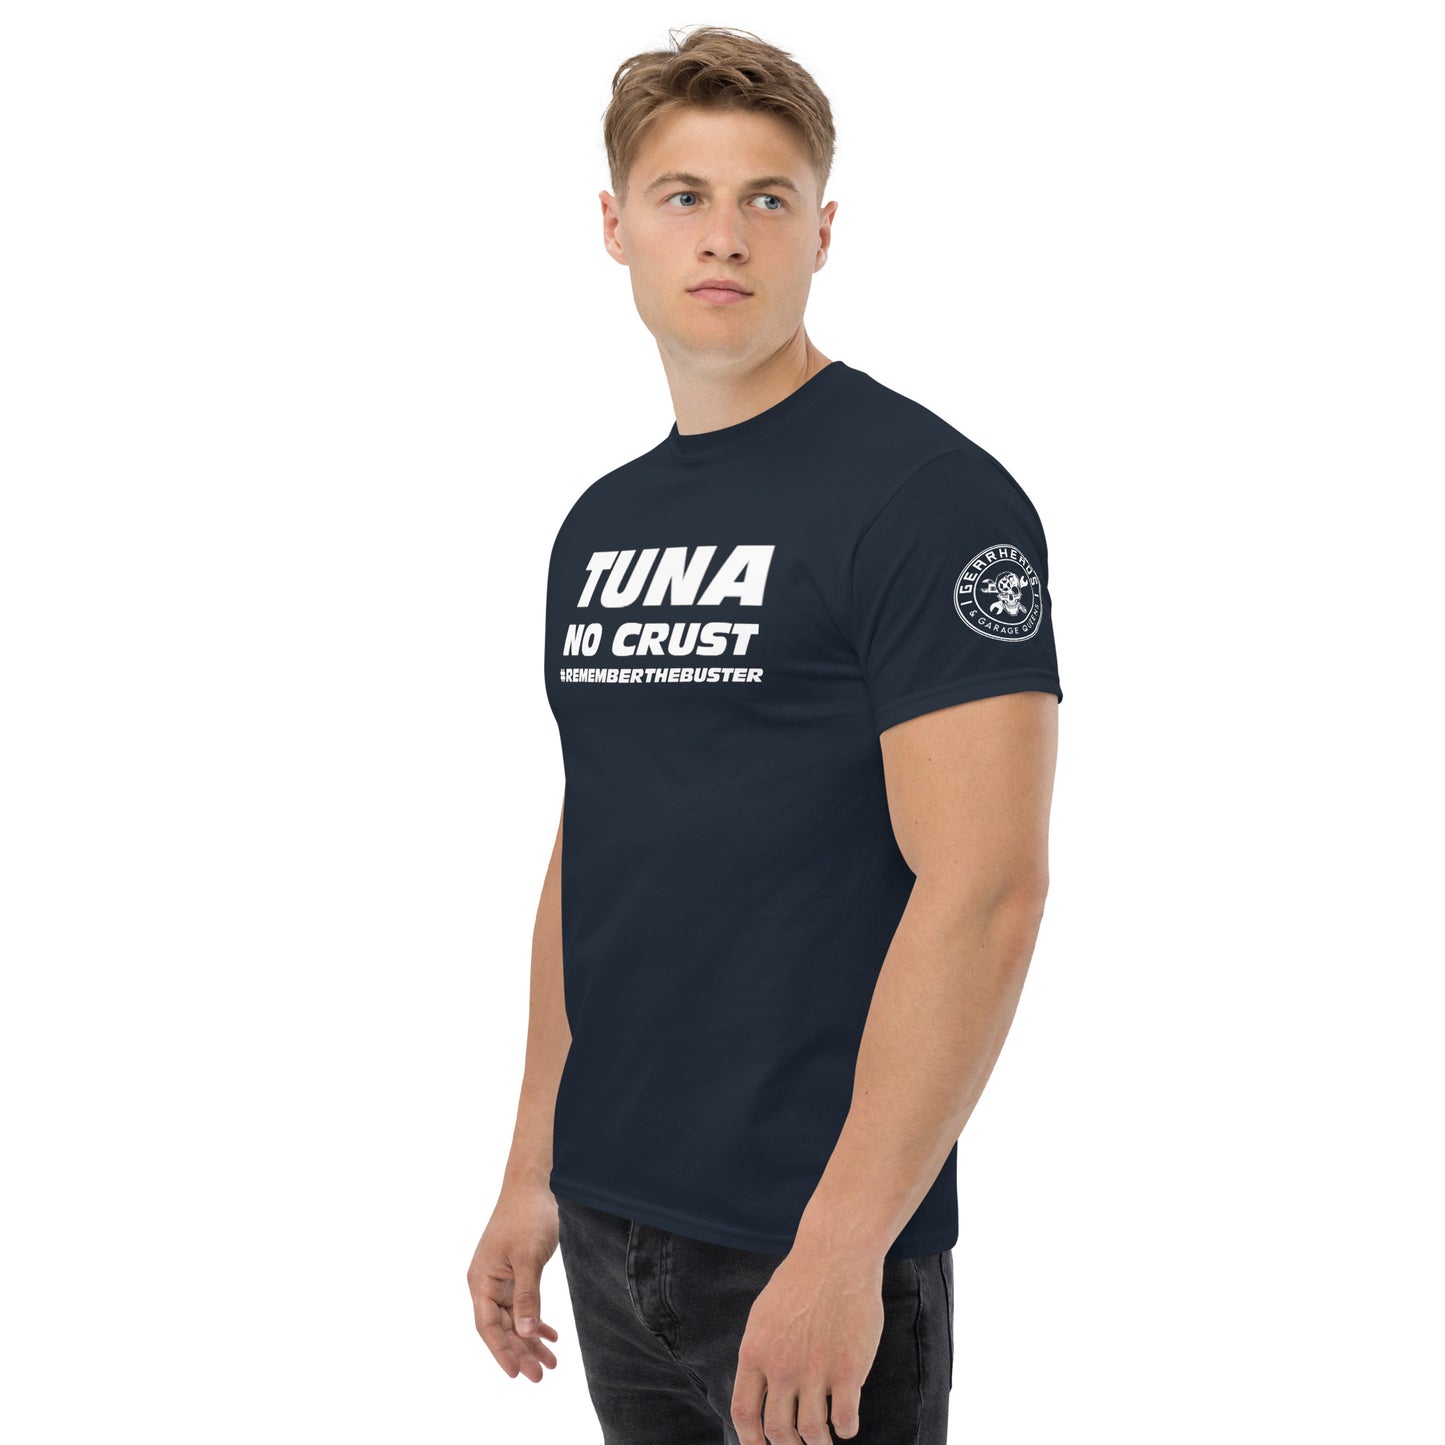 TUNA NO CRUST - Remember the buster - Men's classic tee